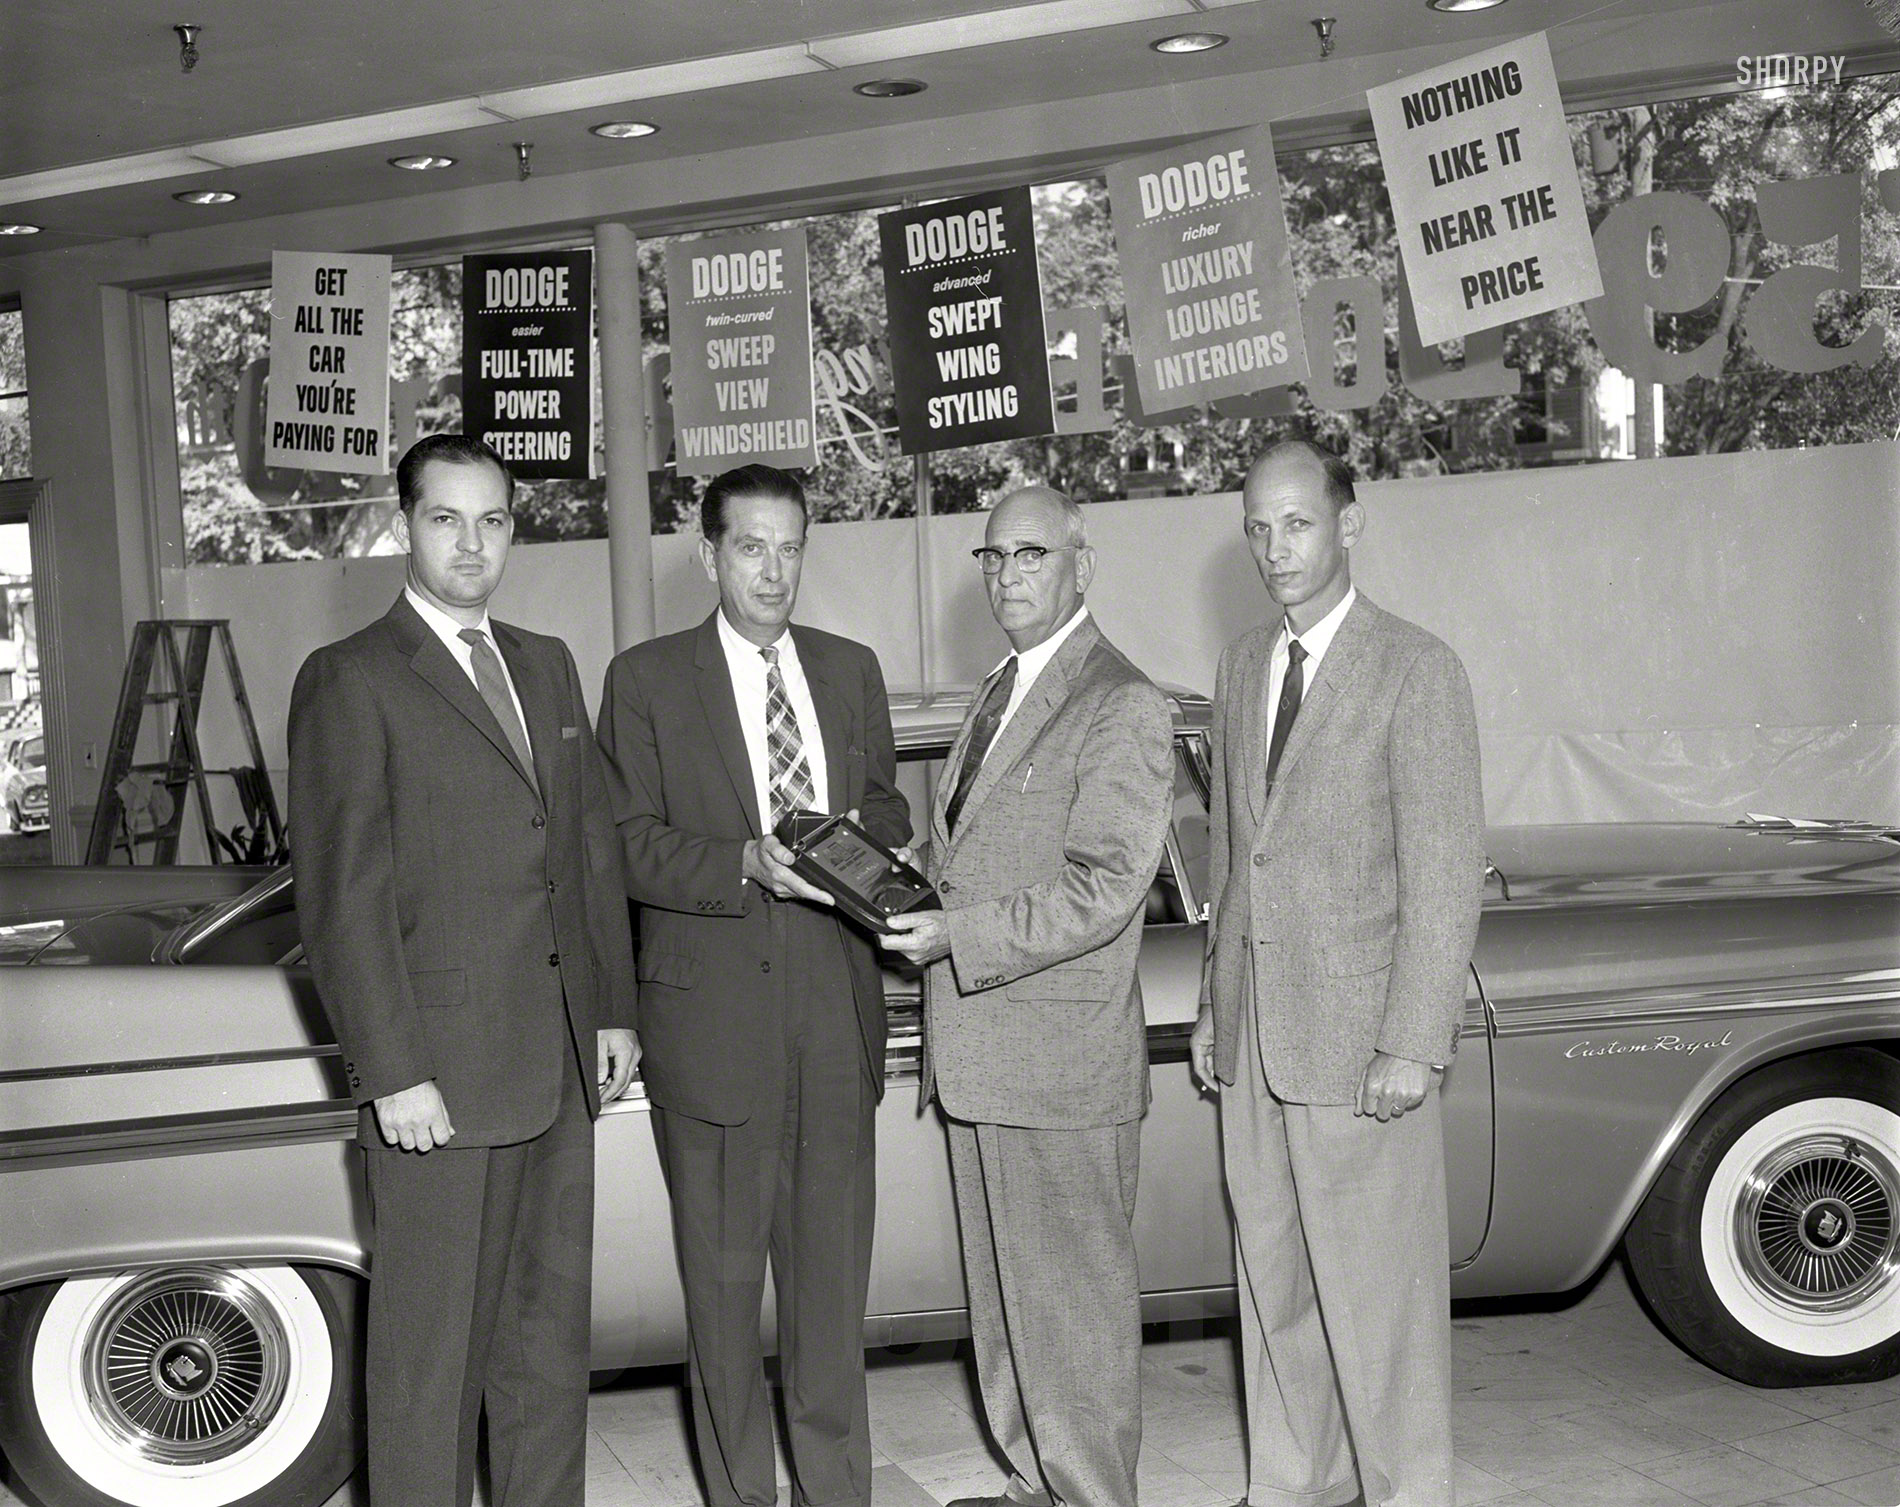 Columbus, Georgia, Dodge dealers in their showroom with one of the last 1958 models, getting ready for the '59s. 4x5 acetate negative. View full size.